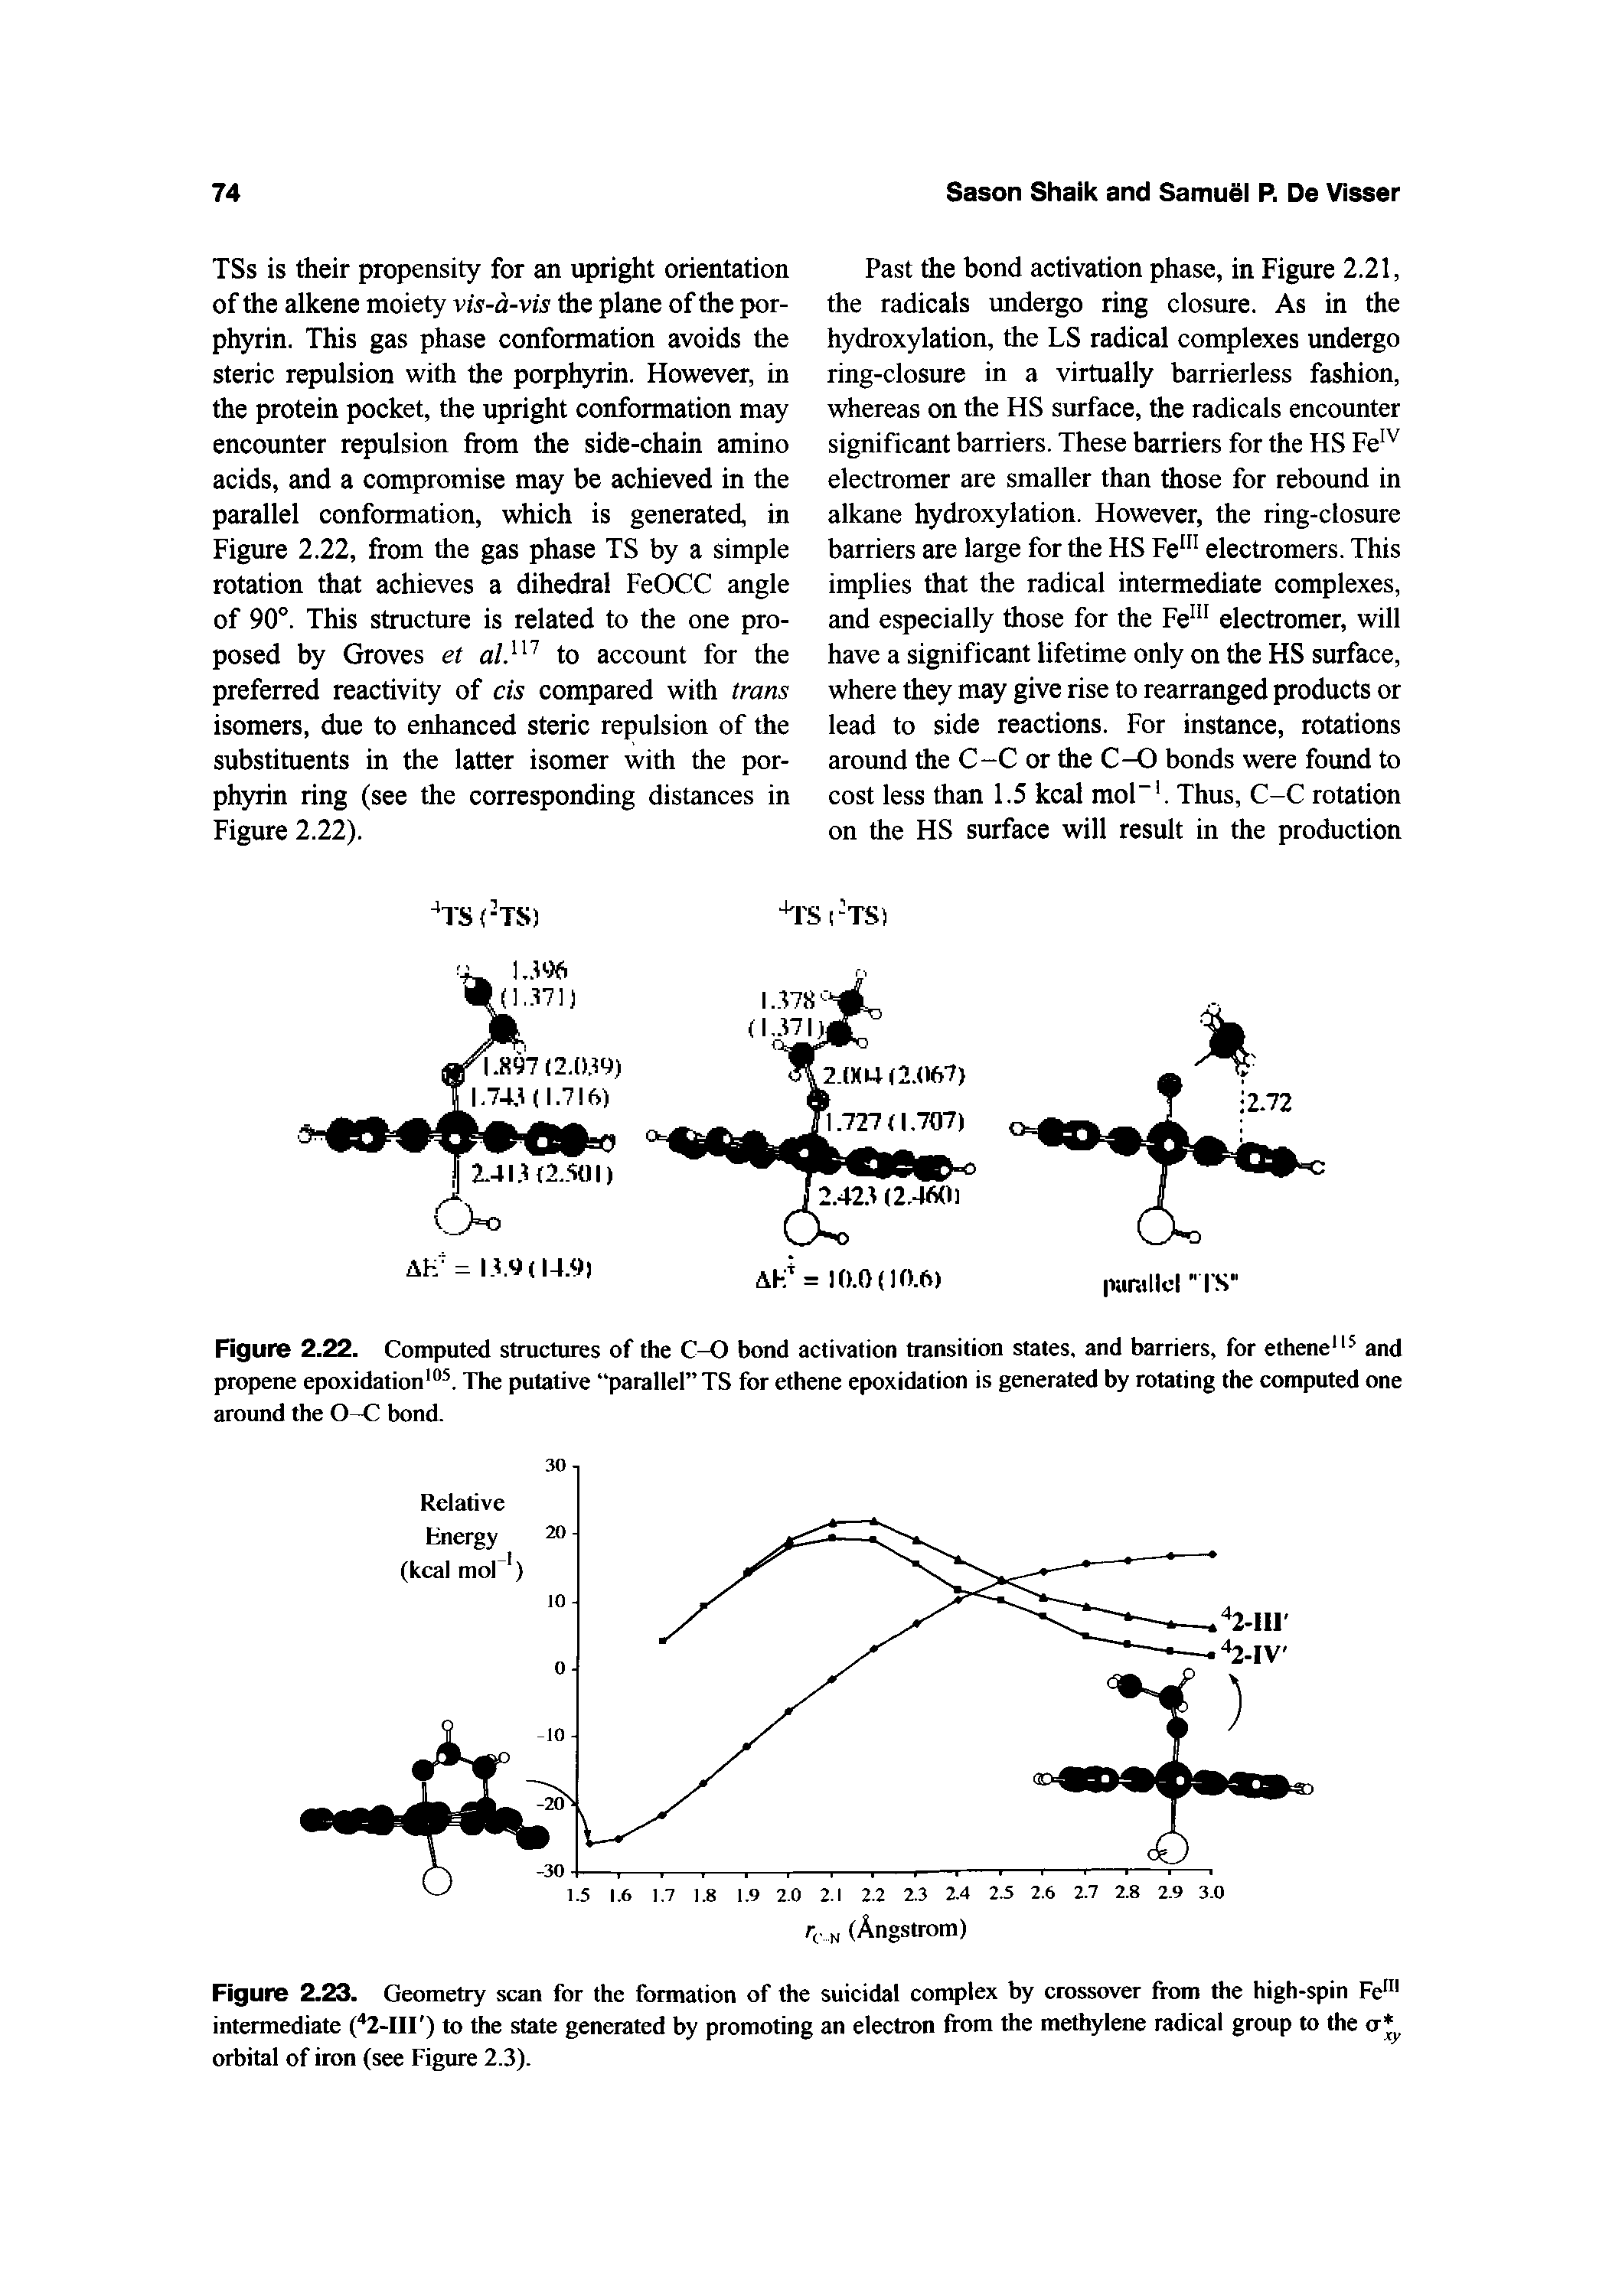 Figure 2.22. Computed structures of the C-O bond activation transition states, and barriers, for ethene" and propene epoxidation . The putative parallel TS for ethene epoxidation is generated by rotating the computed one around the O-C bond.